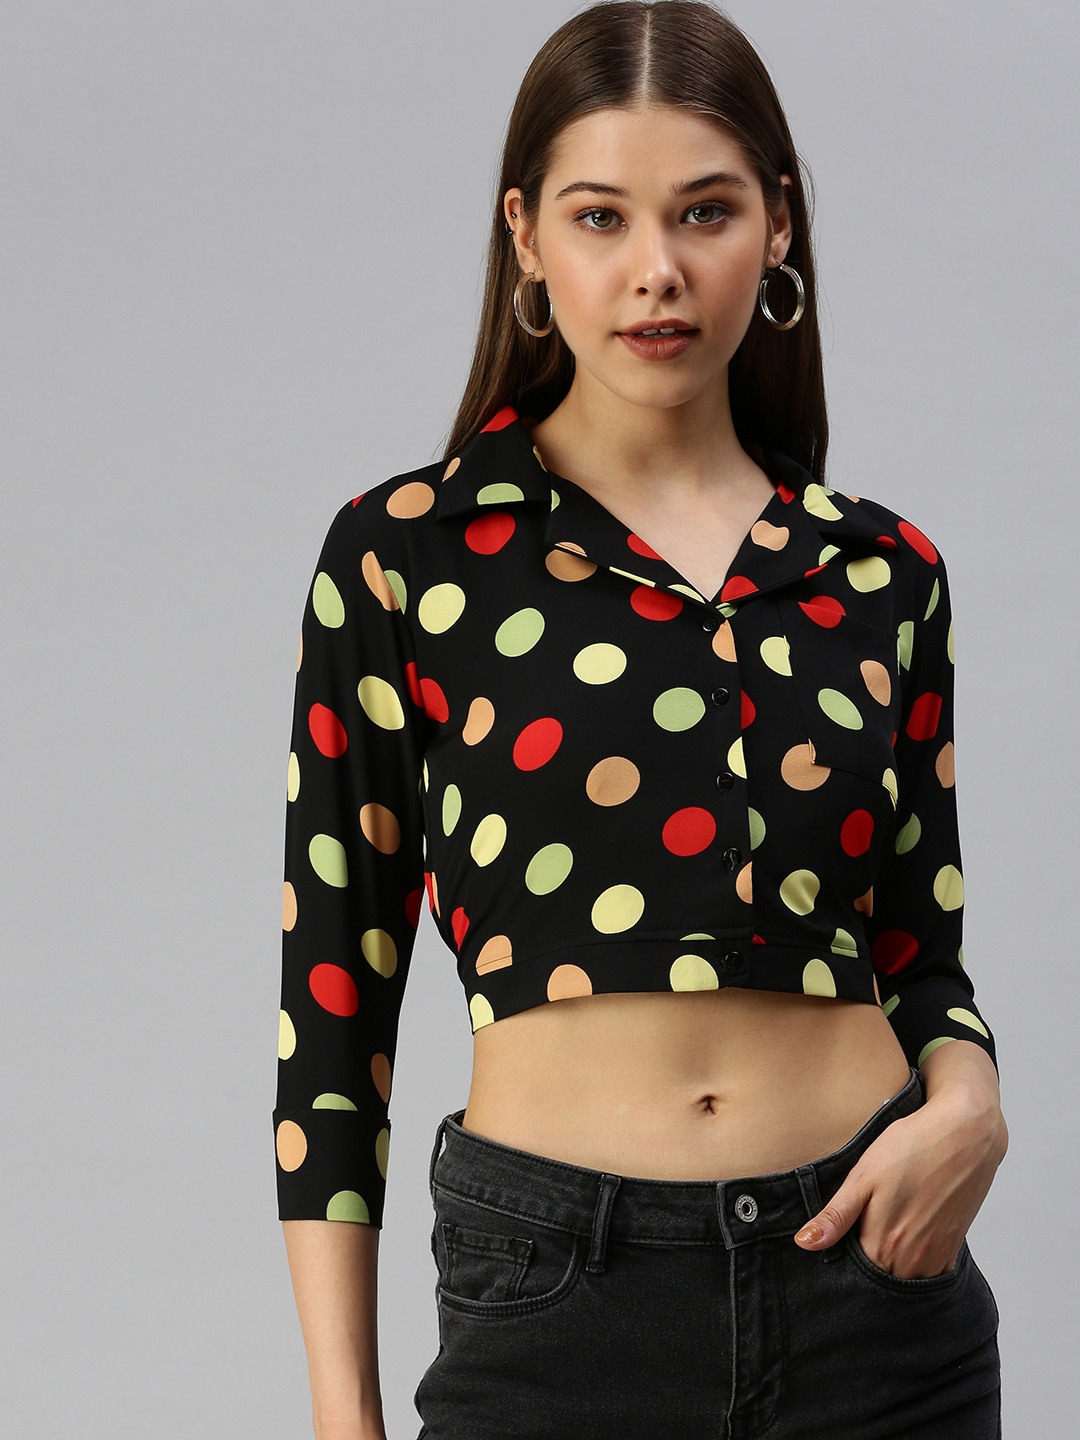 Women's Black Polyester Printed Tops